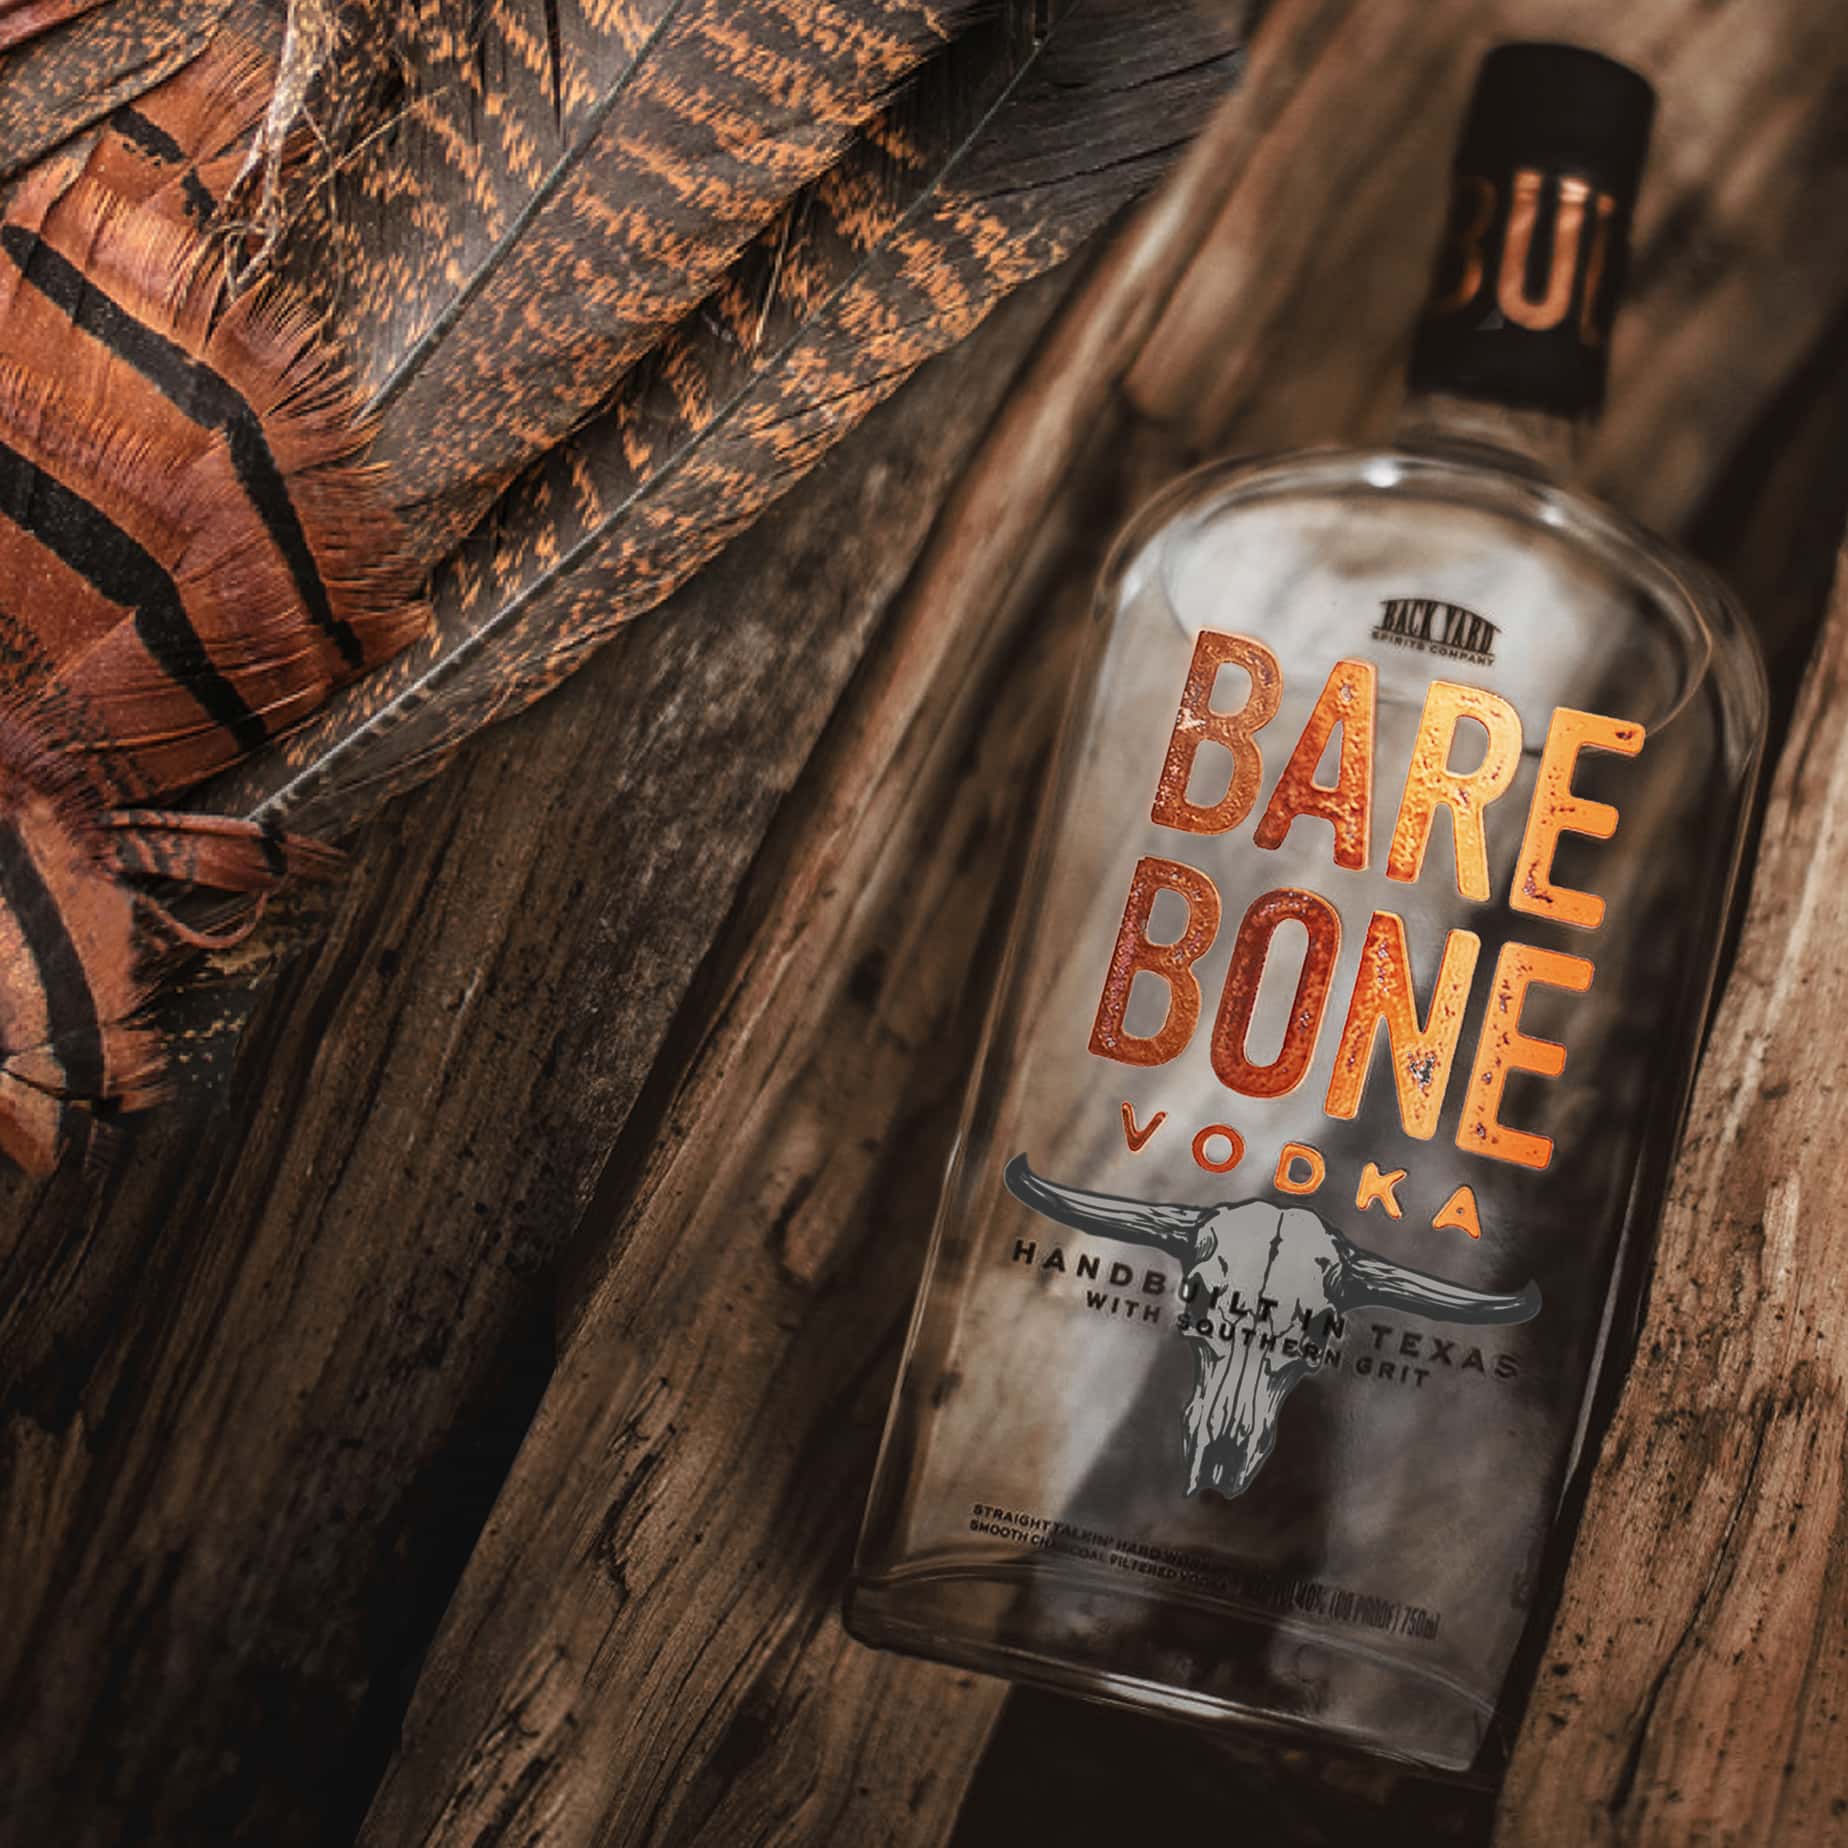 Bare Bone Vodka Crafted By A Texan For Bourbon Lovers